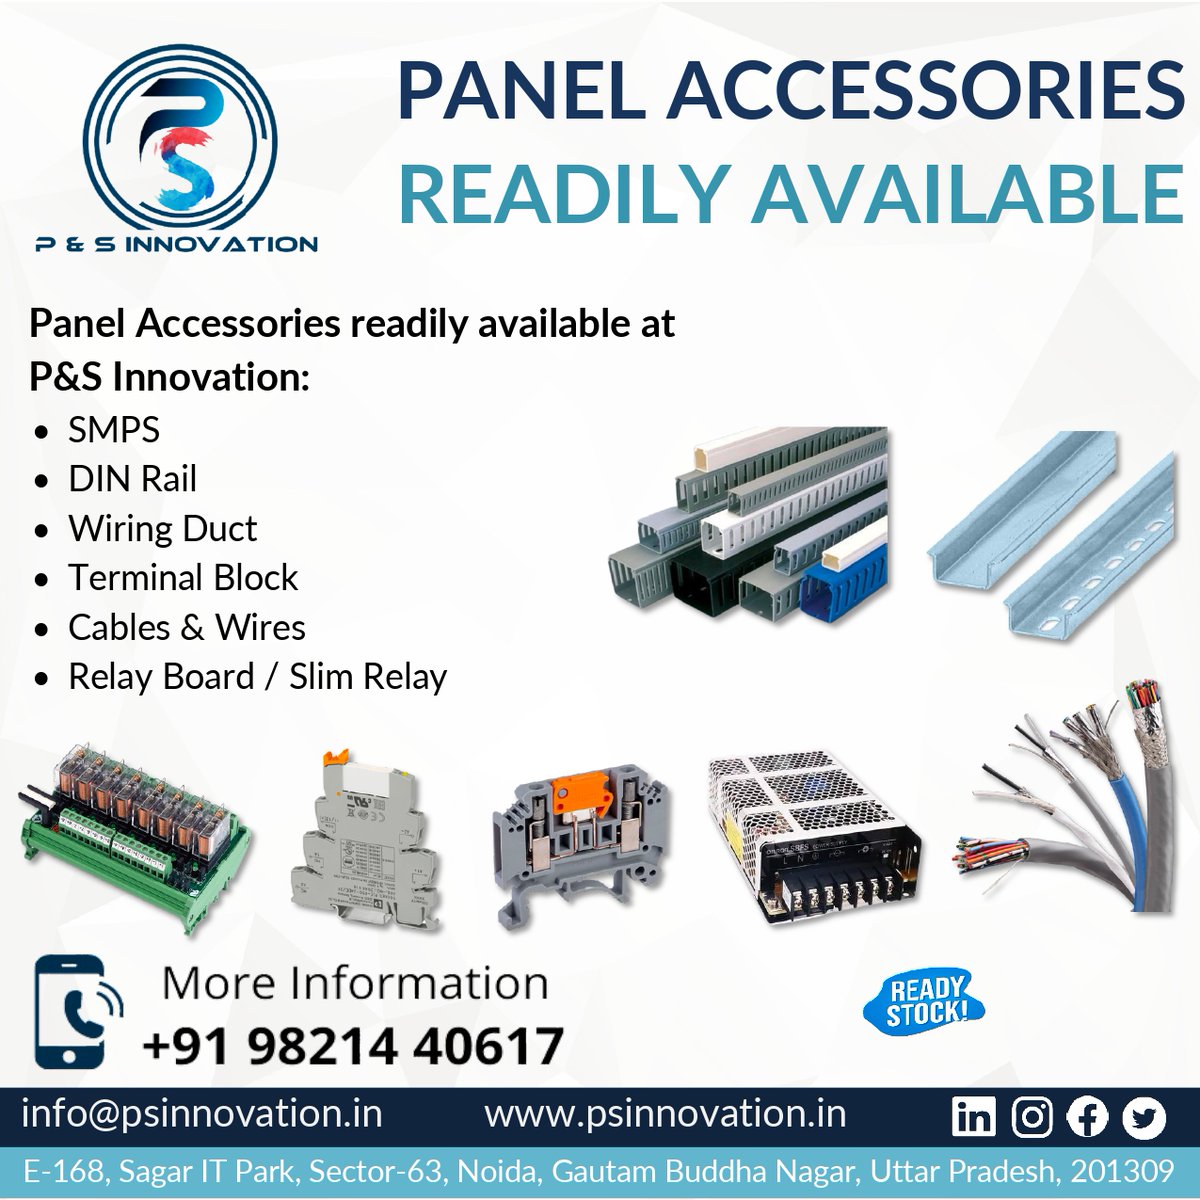 Wide range of Panel Accessories available at P&S Innovation

For More Information WhatsApp us on
wa.me/919821440617

#pandsinnovation #industrialautomation #products #networkcables #automationproducts #slimrelay #phoenixcontact #omron #relayboard #wiringduct #trinitytouch